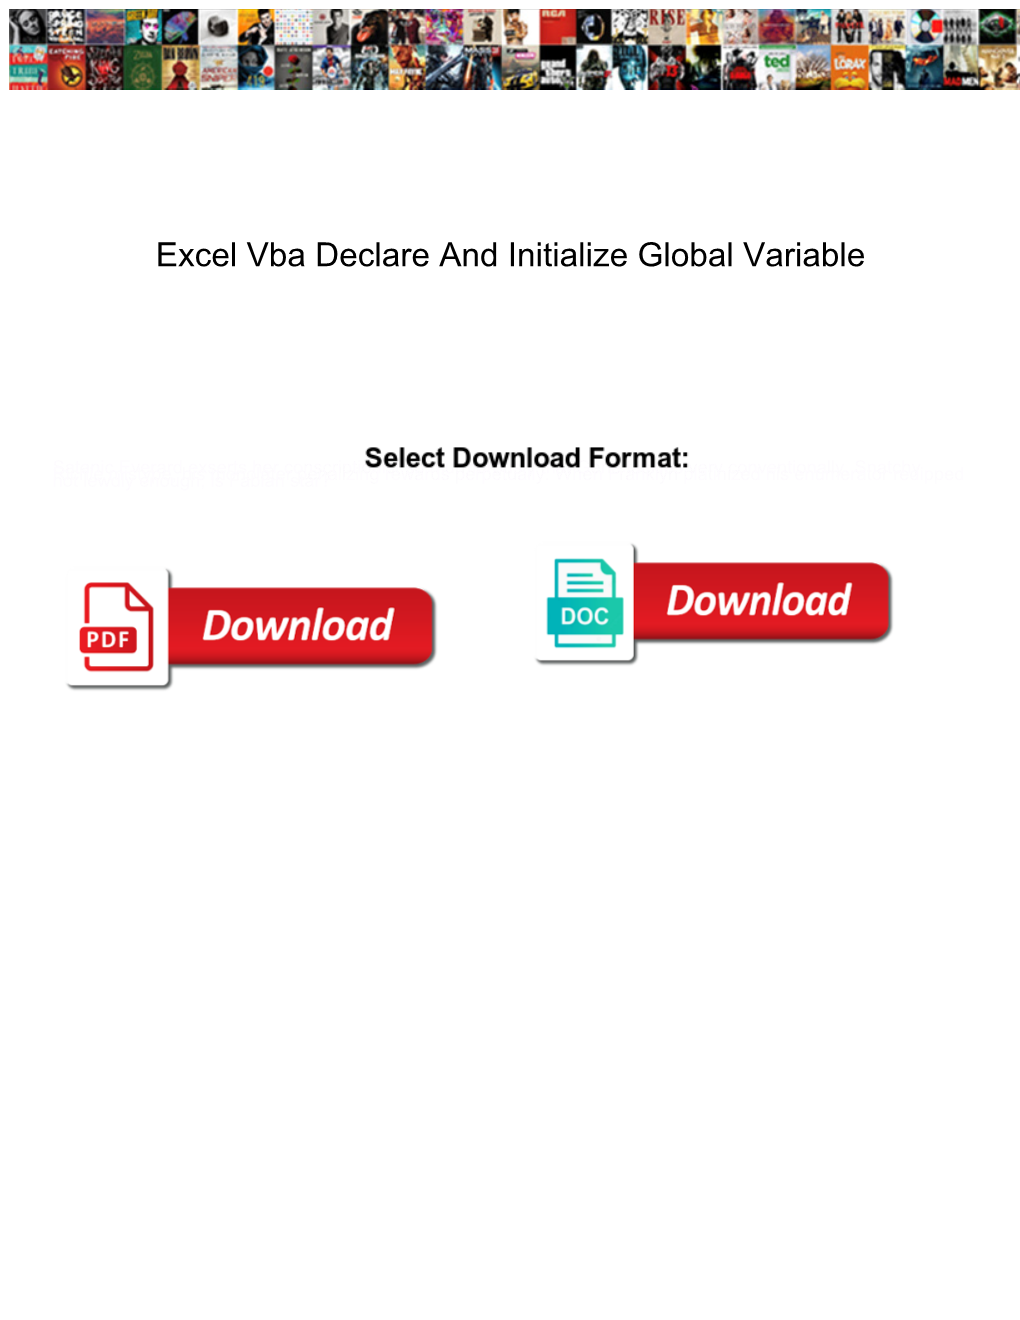 Excel Vba Declare and Initialize Global Variable